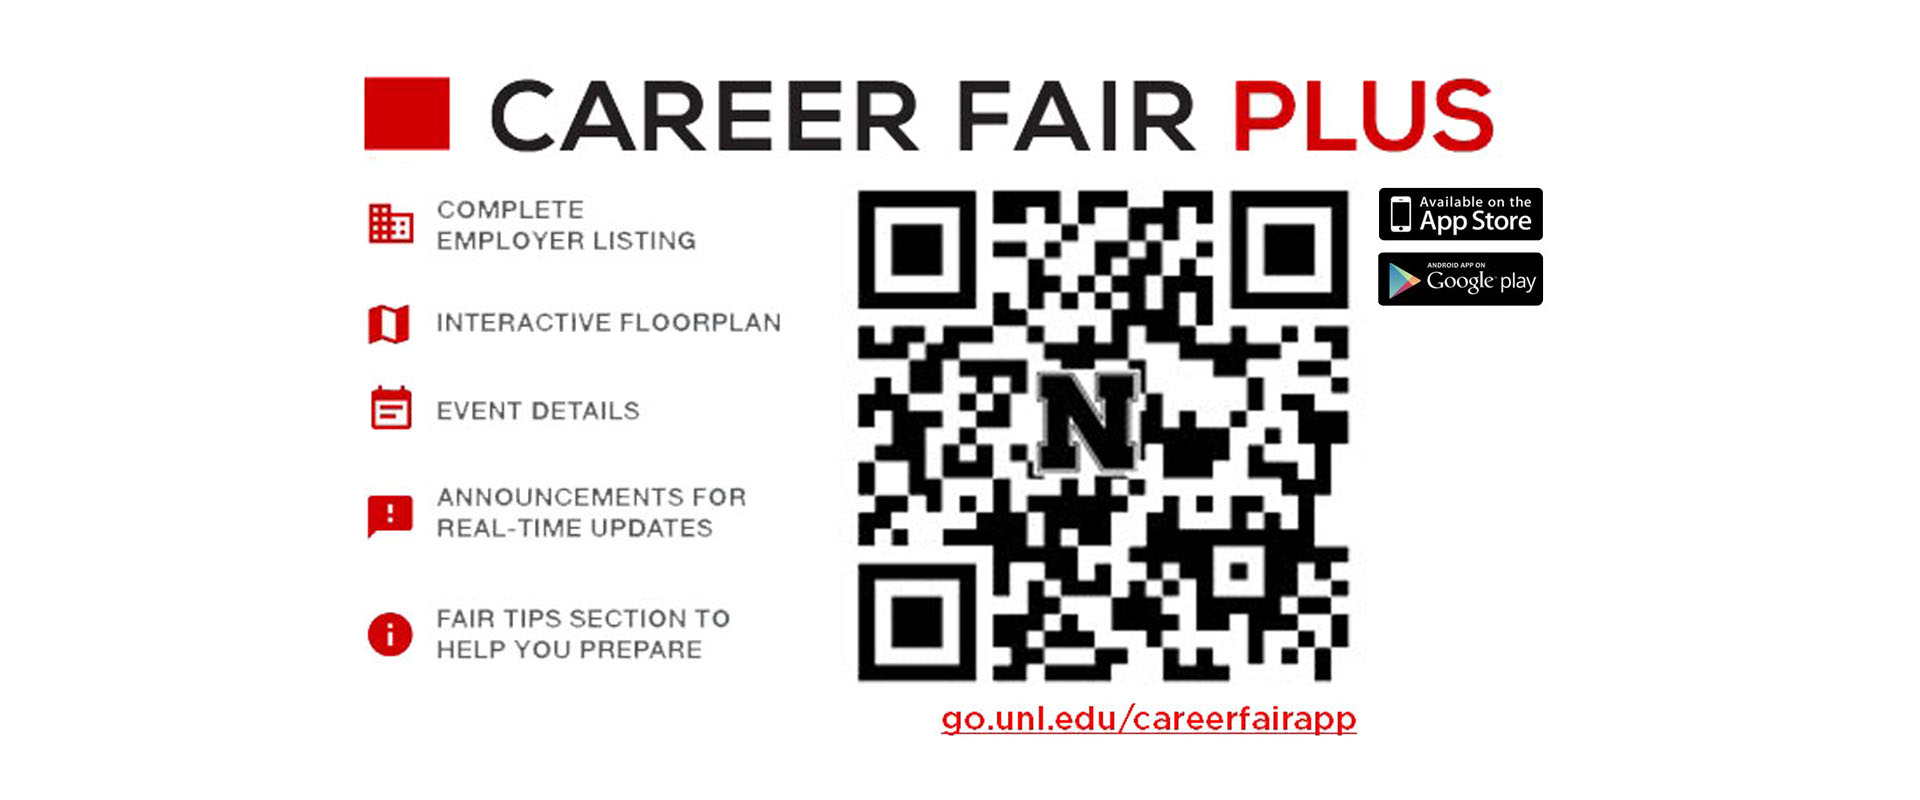 Image contains a QR code to download the career fair plus app. This app can also be downloaded by clicking the link on the article.